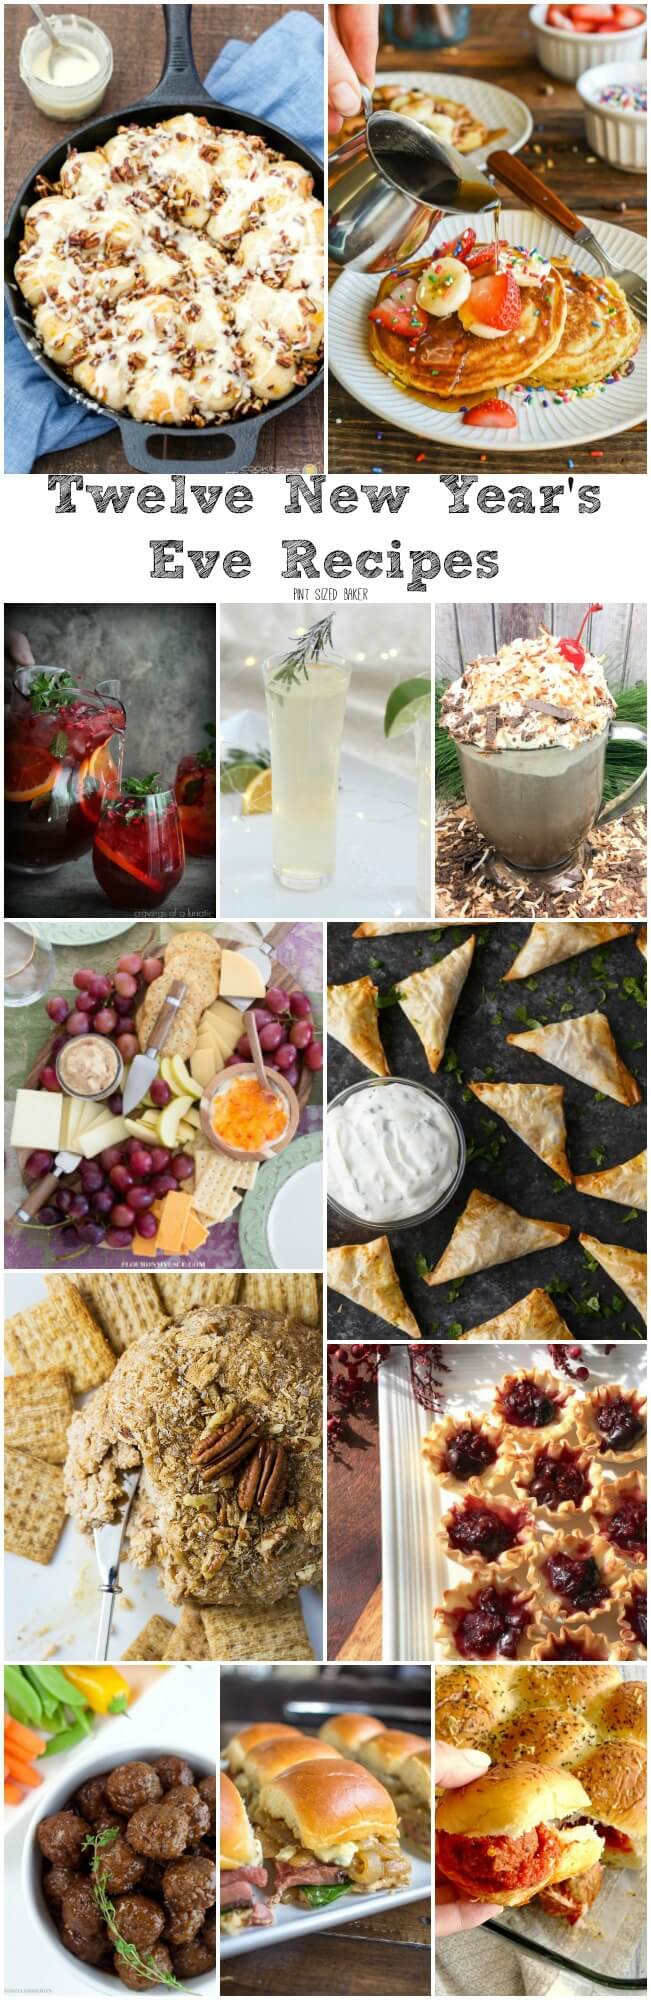 Here's twelve New Year's Eve Recipes that are easy, delicious, and awesome for parties of all sizes! Drinks, appetizers, finger food, and breakfast recipes.